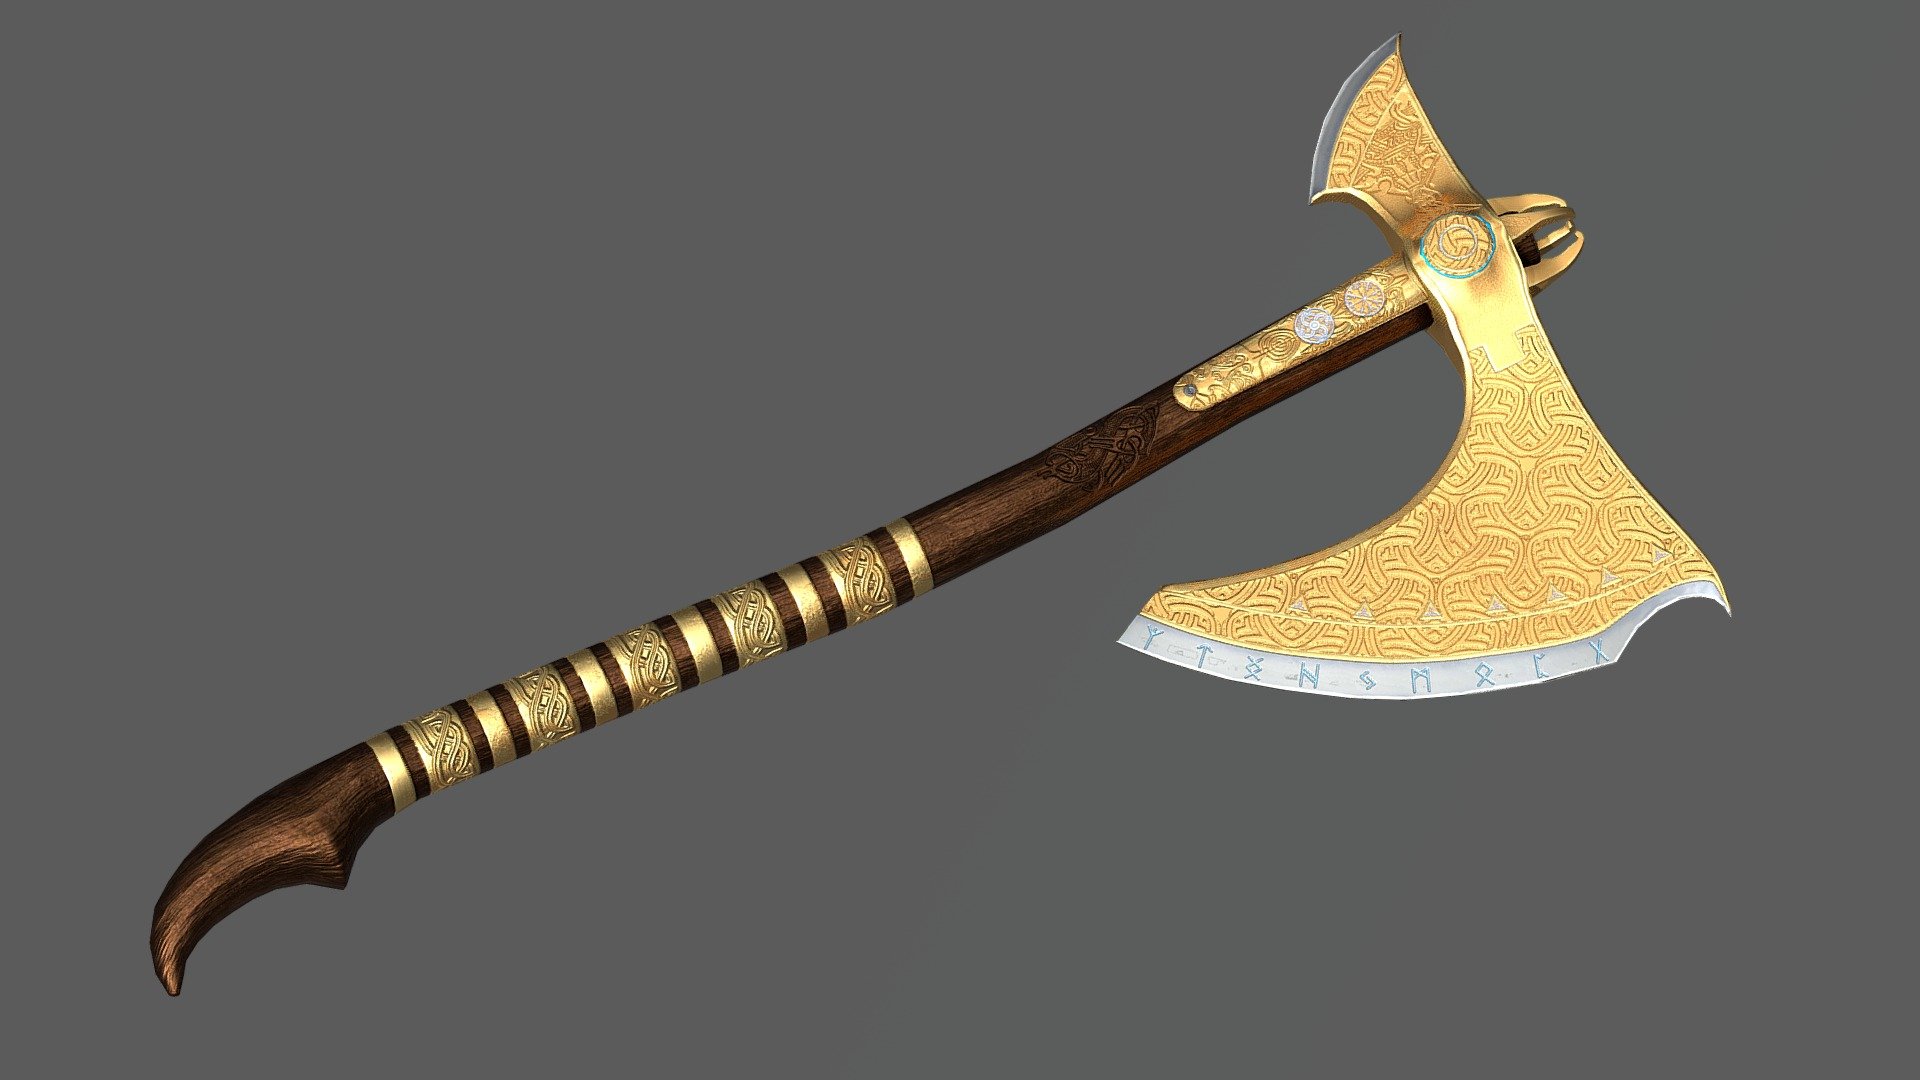 Game asset Viking axe, ready for UE4.
Texture resolution: 2048x2048 3d model